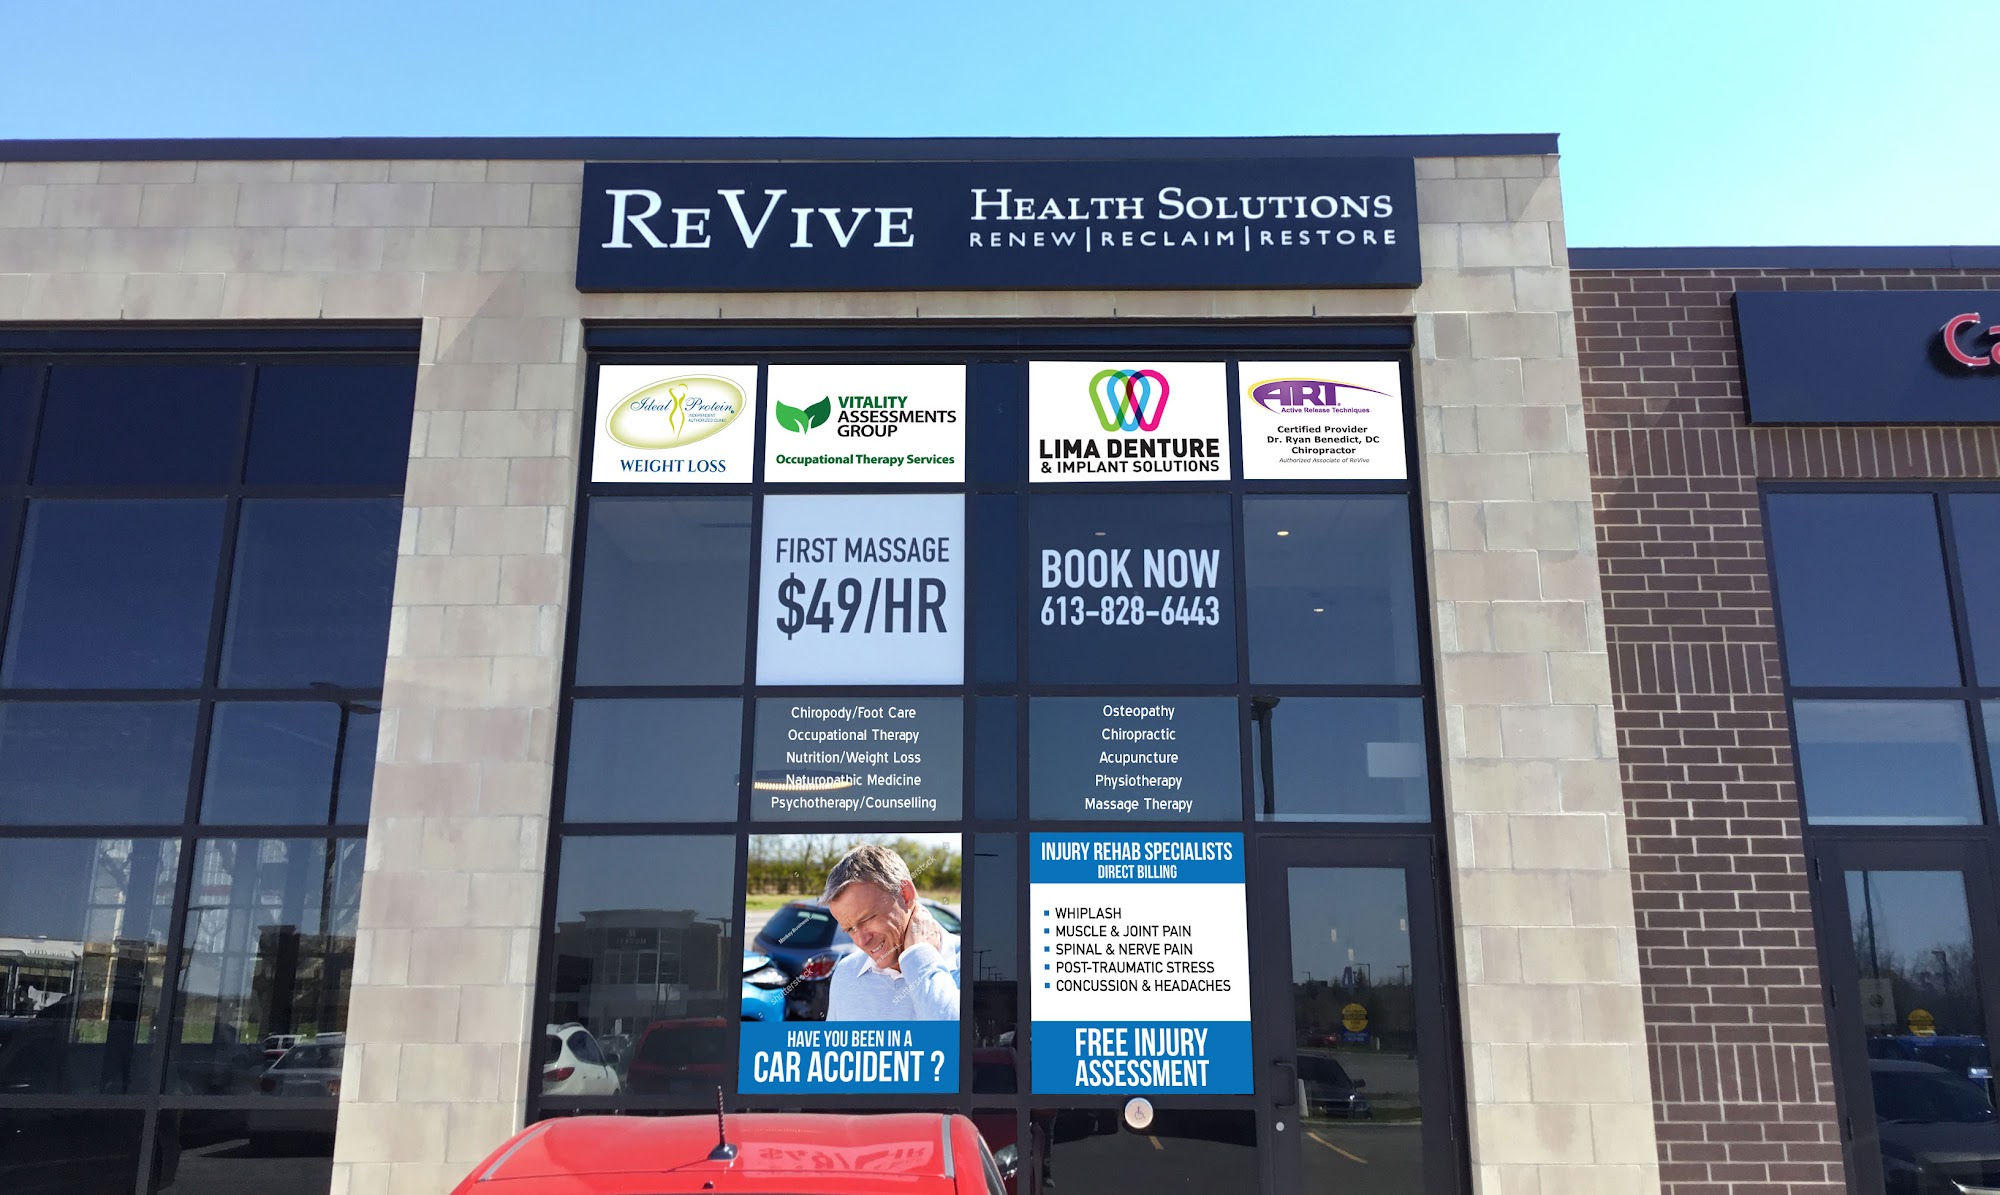 ReVive Health Solutions